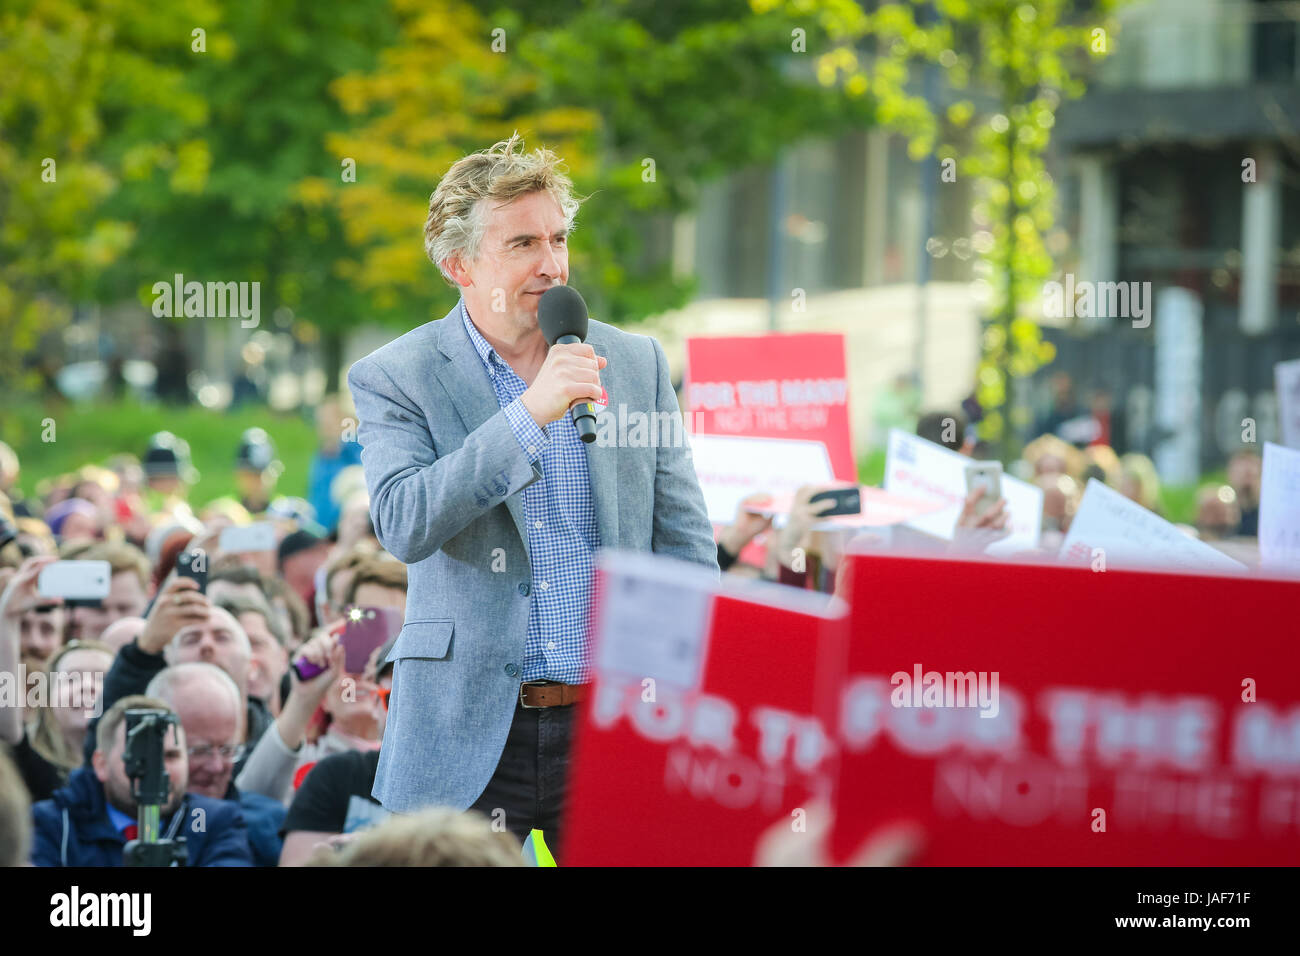 Birmingham UK Tuesday 6th June 2014. Actor and comedian Steve Coogan addresses a rally in support of the Labour Party. Credit: Peter Lopeman/Alamy Live News Stock Photo